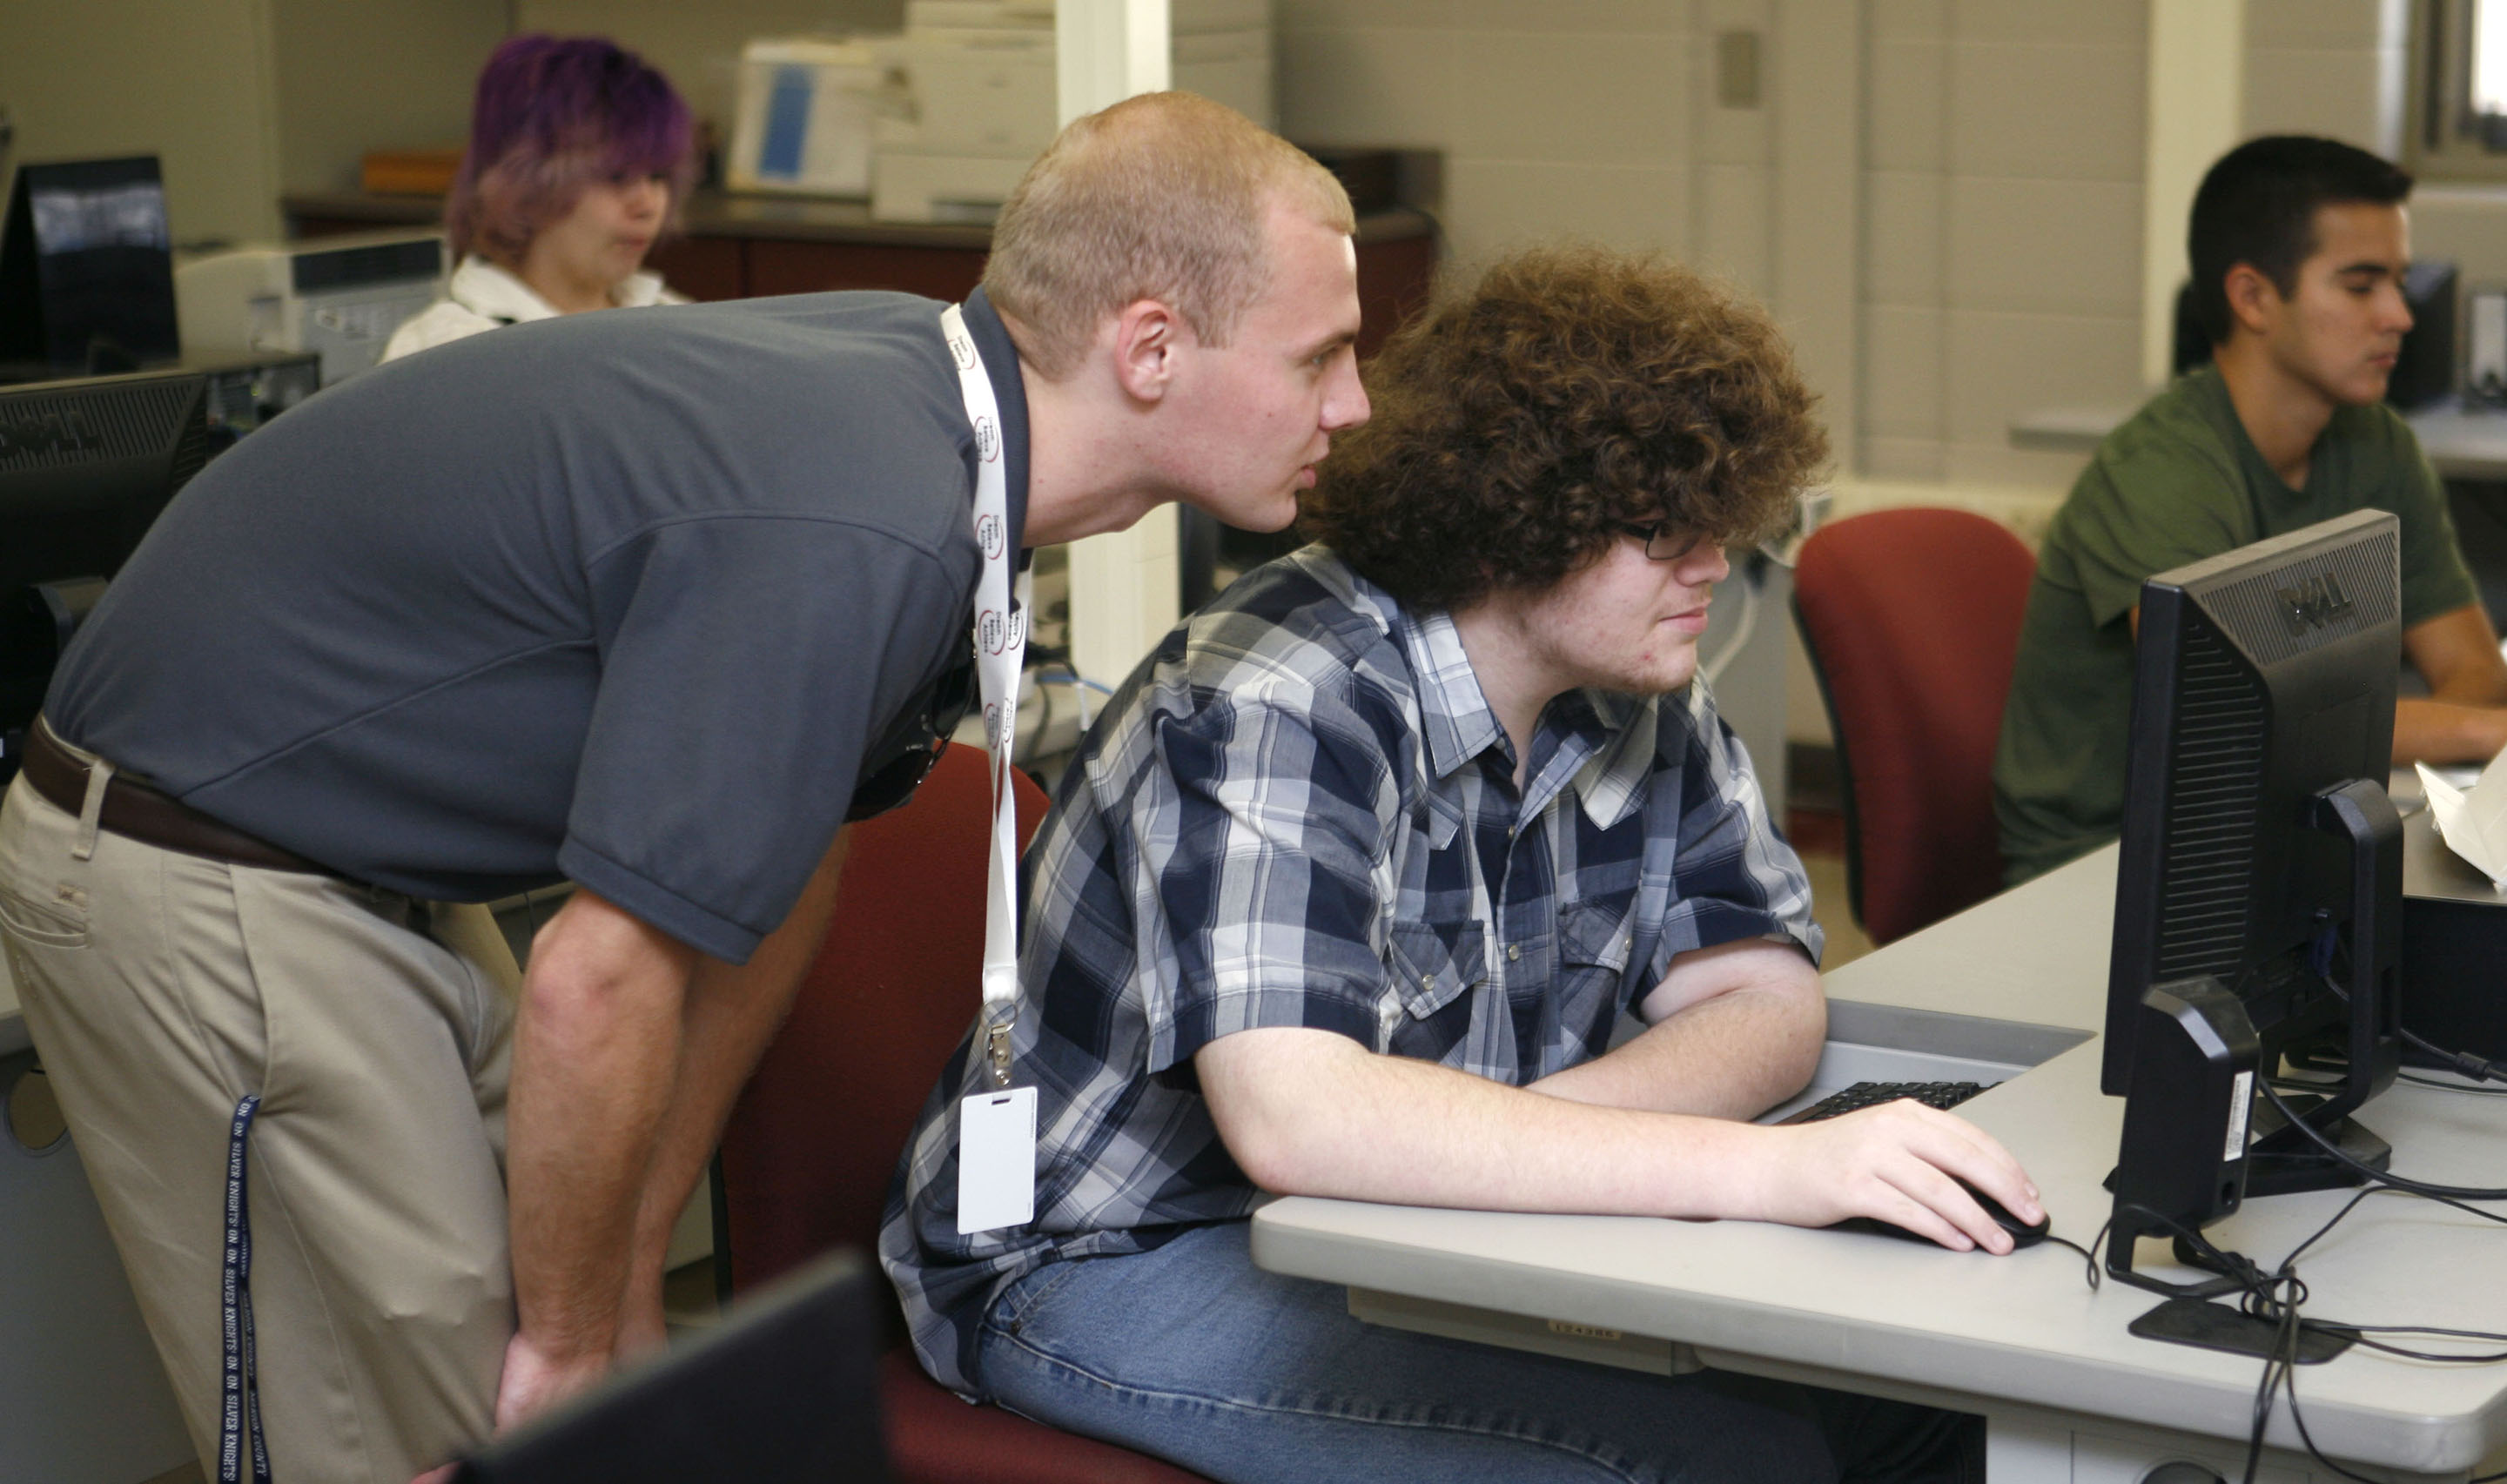 Dylan Tungate, a technology instructional assistant for Marion County Schools, looks on as Zach Nalley works on a Microsoft IT Academy course in Anita Milburn’s information technology class at Marion County Area Technology Center. Photo by Mike Marsee, Nov. 4, 2015